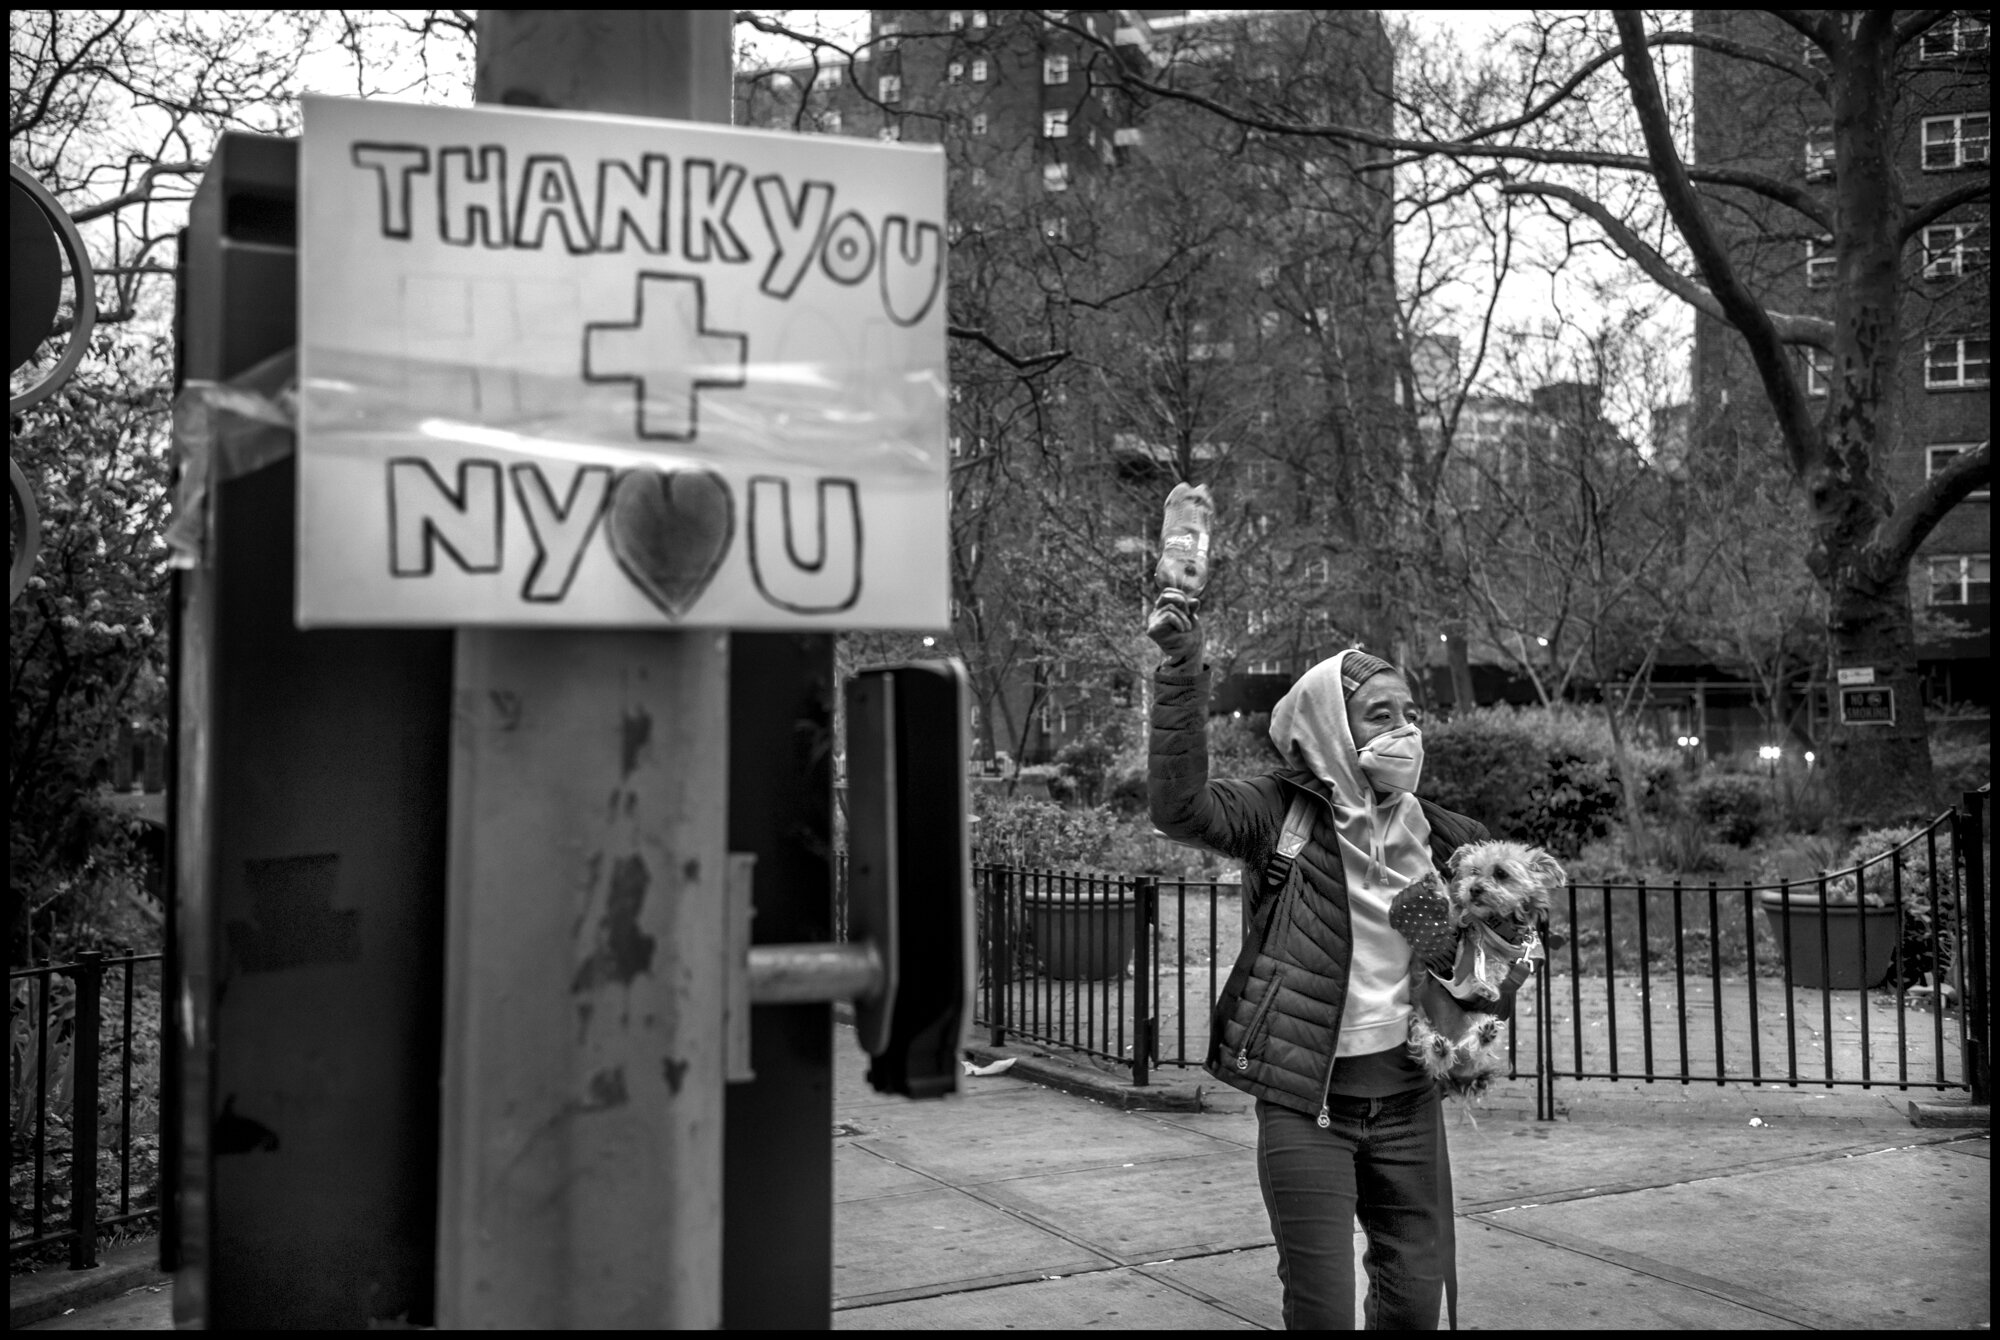  A local resident living near Mount Sinai Hospital joins in with applause and cheering at 7pm to thank all of the hospital workers at Mount Sinai Hospital.  April 19, 2020. © Peter Turnley  ID# 26-004 